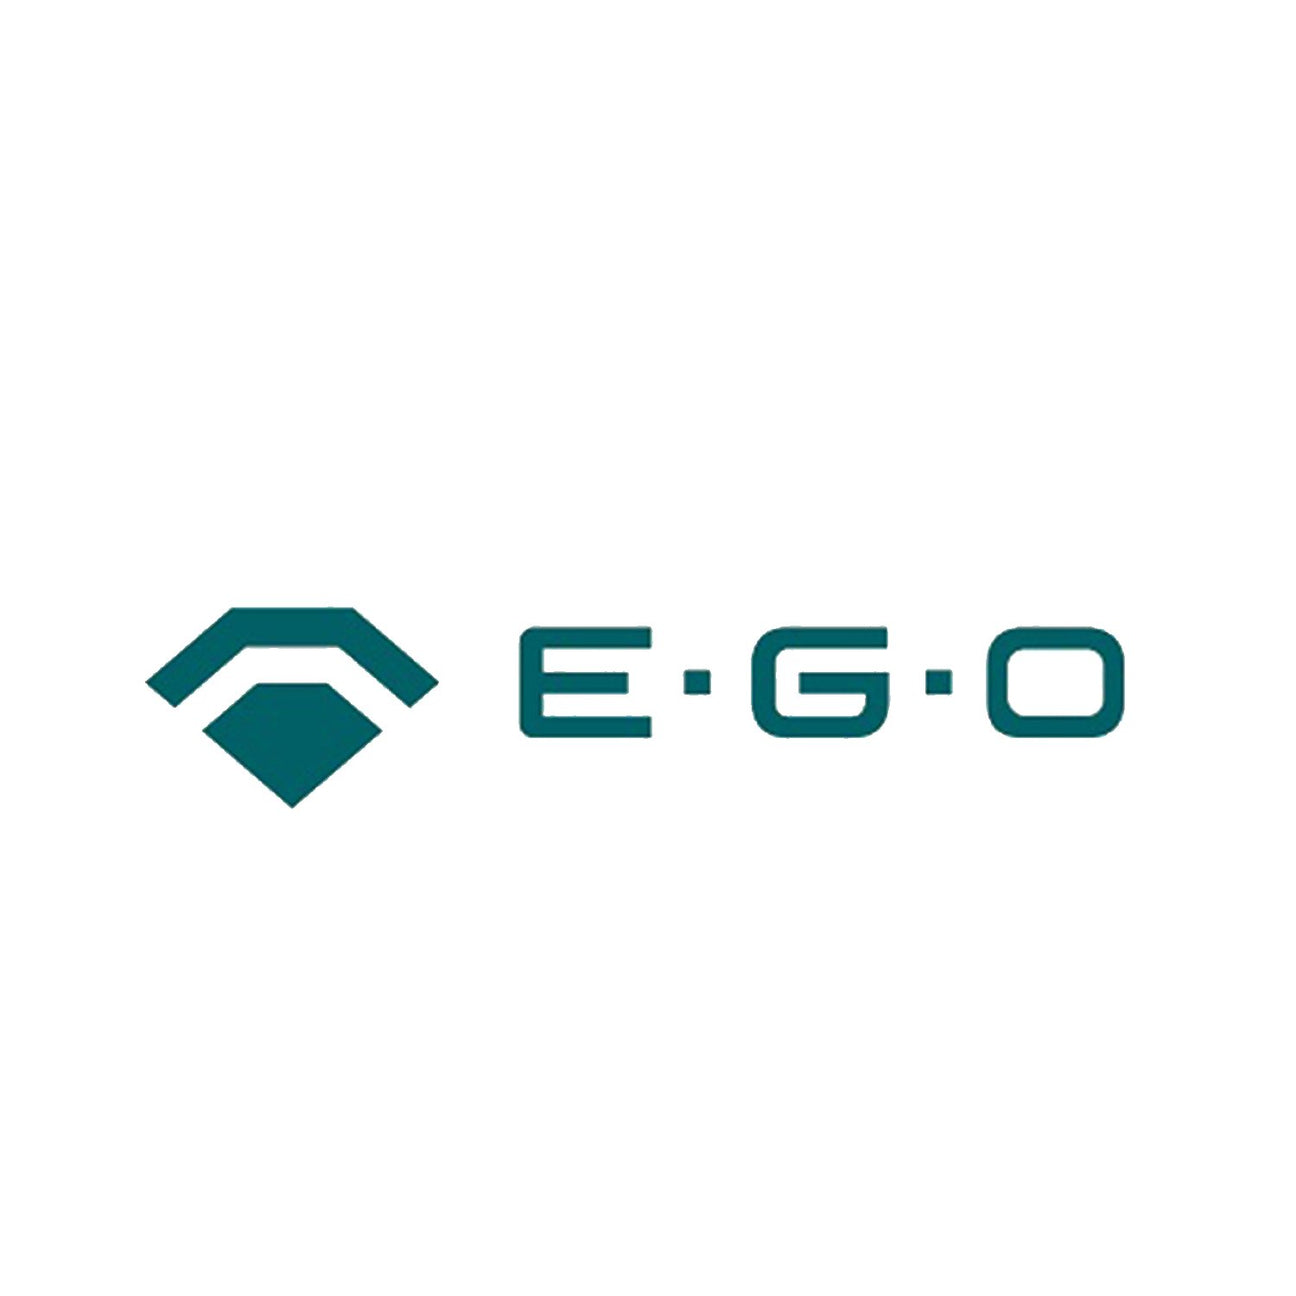 EGO Cooktop & Oven Parts - My Oven Spares